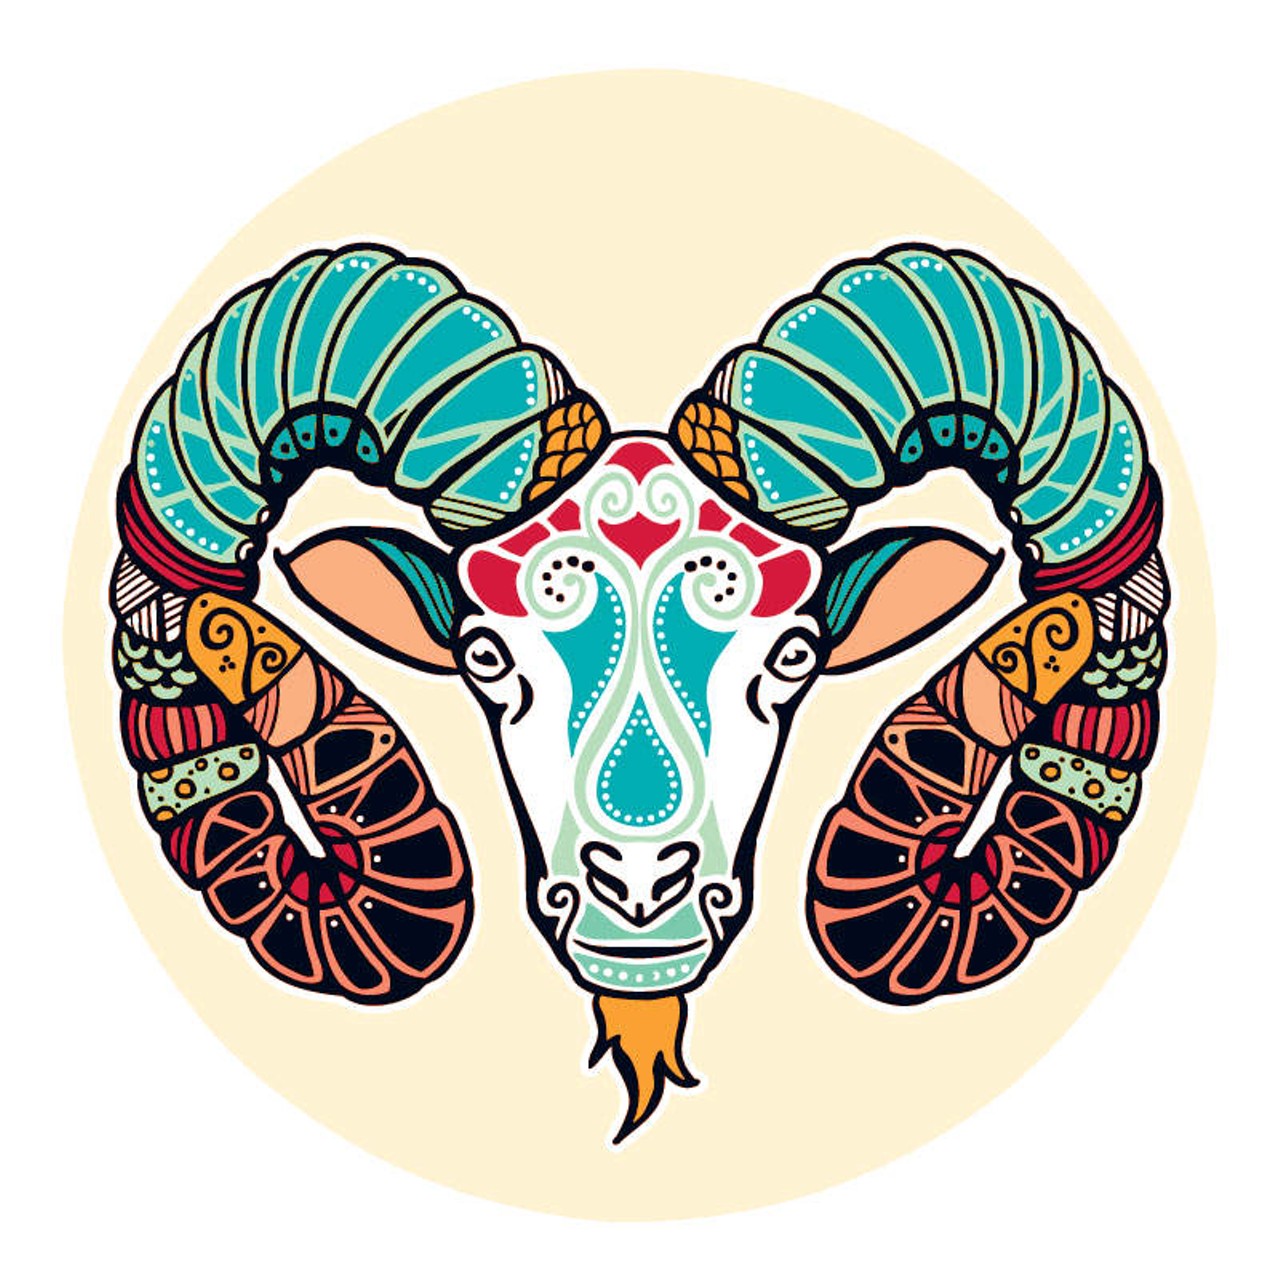 ARIES (March 21- April 20): 
If you are a &#147;late Aries,&#148; life has got to be looking a little crazy. Those of you who were born in the early part of the sign are probably working out a less electrified version of this. It&#146;s hard to know what to say to any of you at the moment &#151; because the scenery in your neck of the woods has &#147;change&#148; written all over it. If there was ever a time when it would be totally appropriate for you to rearrange pretty much everything, this is it. I guess the only advice I can offer you is: Trust life, let out all the stops, and know that whatever&#146;s going on, this is no time to hold back.